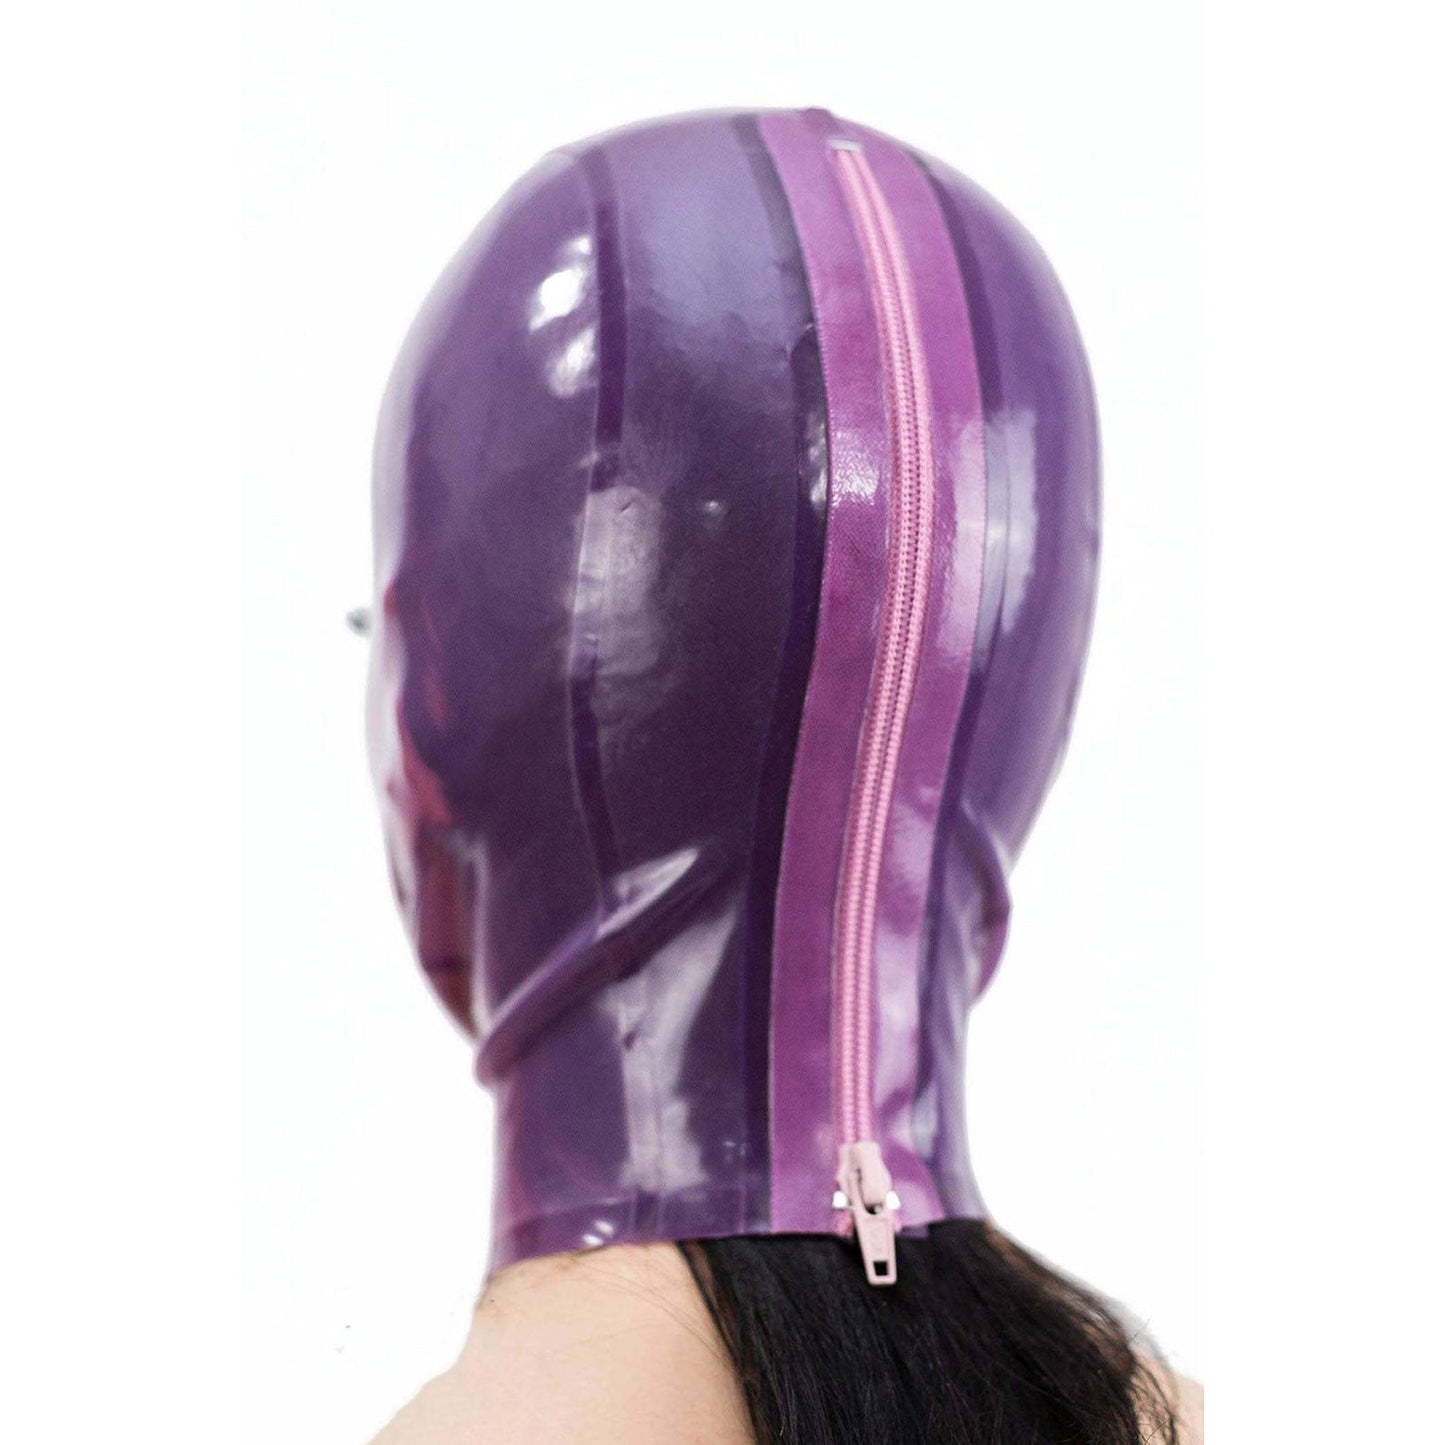 MONNIK Latex Hood Translucent Purple Colors with Trim and Rear Zipper Handmade for Costume Catsuit Cosplay